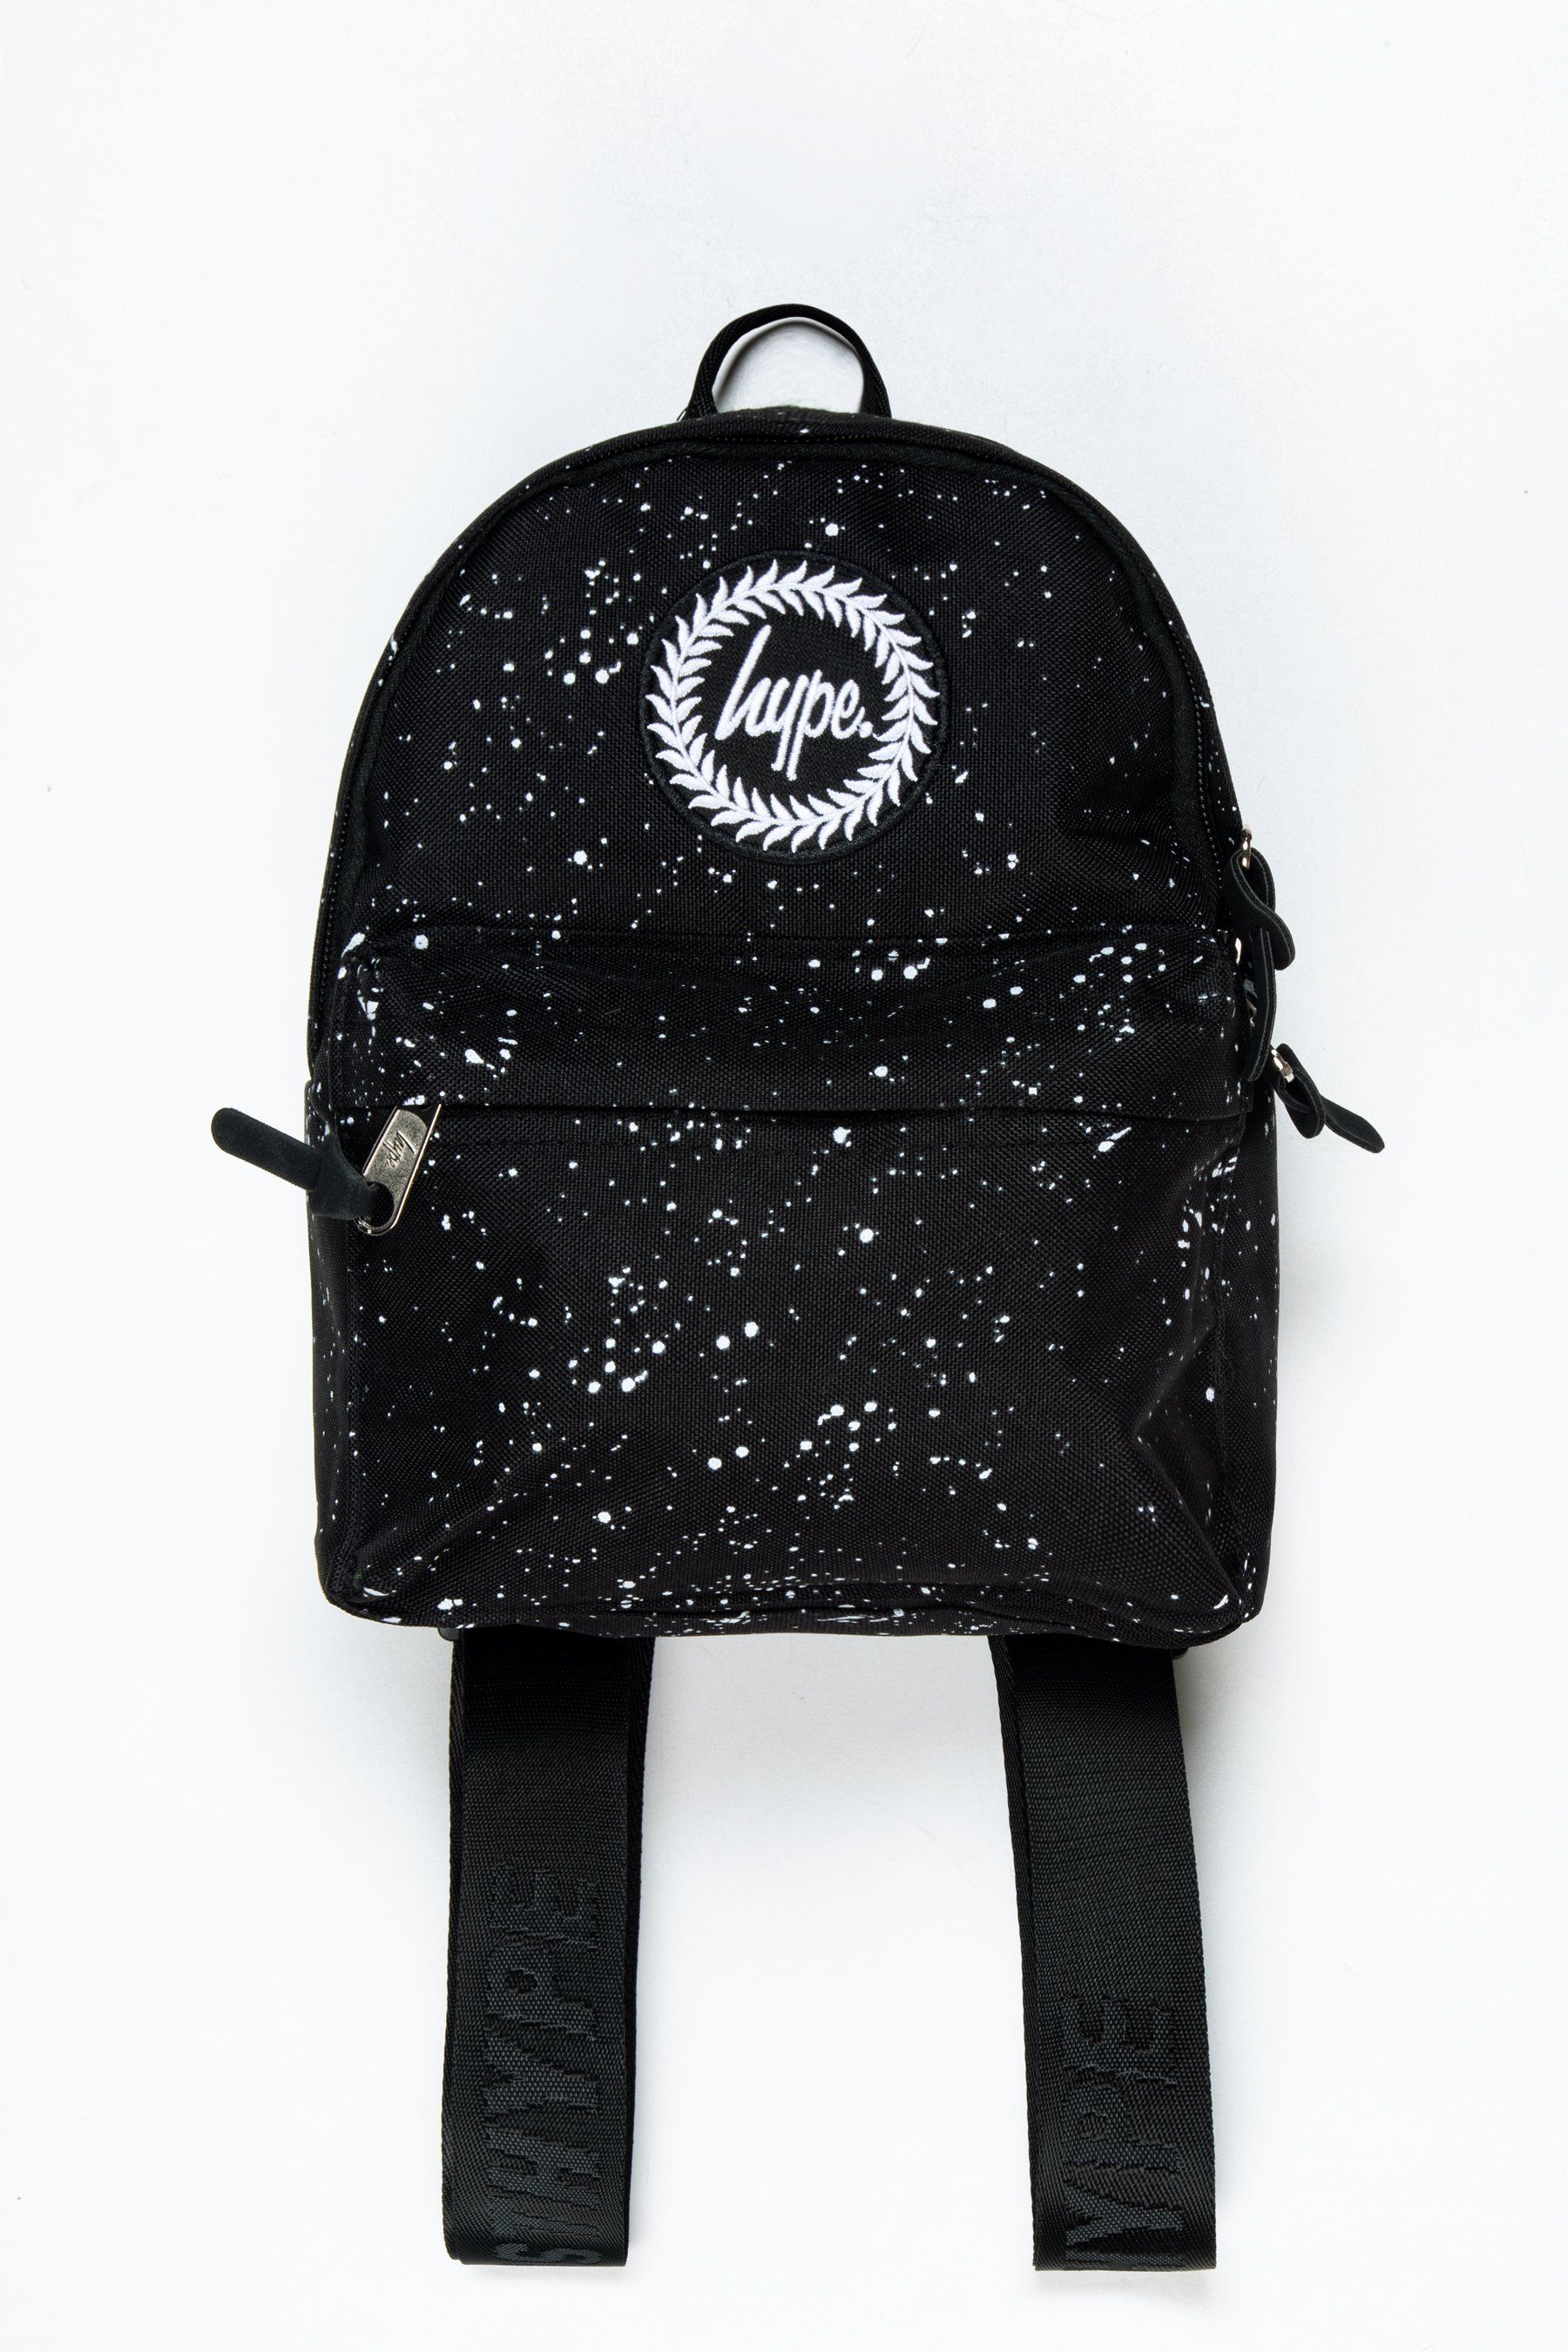 Introducing the HYPE. Black Speckle Mini Backpack, if you're reading this, then you want to know more. Our standard unisex mini backpack shape and style features our signature speckle fade all-over print in a monochrome colour palette. This backpack is the ultimate essential mini bag to transport your everyday essentials, this bag is smaller than our standard backpacks. With embossed adjustable straps with the perfect amount of padding. Finished with the iconic HYPE. crest logo embroidered on the front. Wipe clean only.